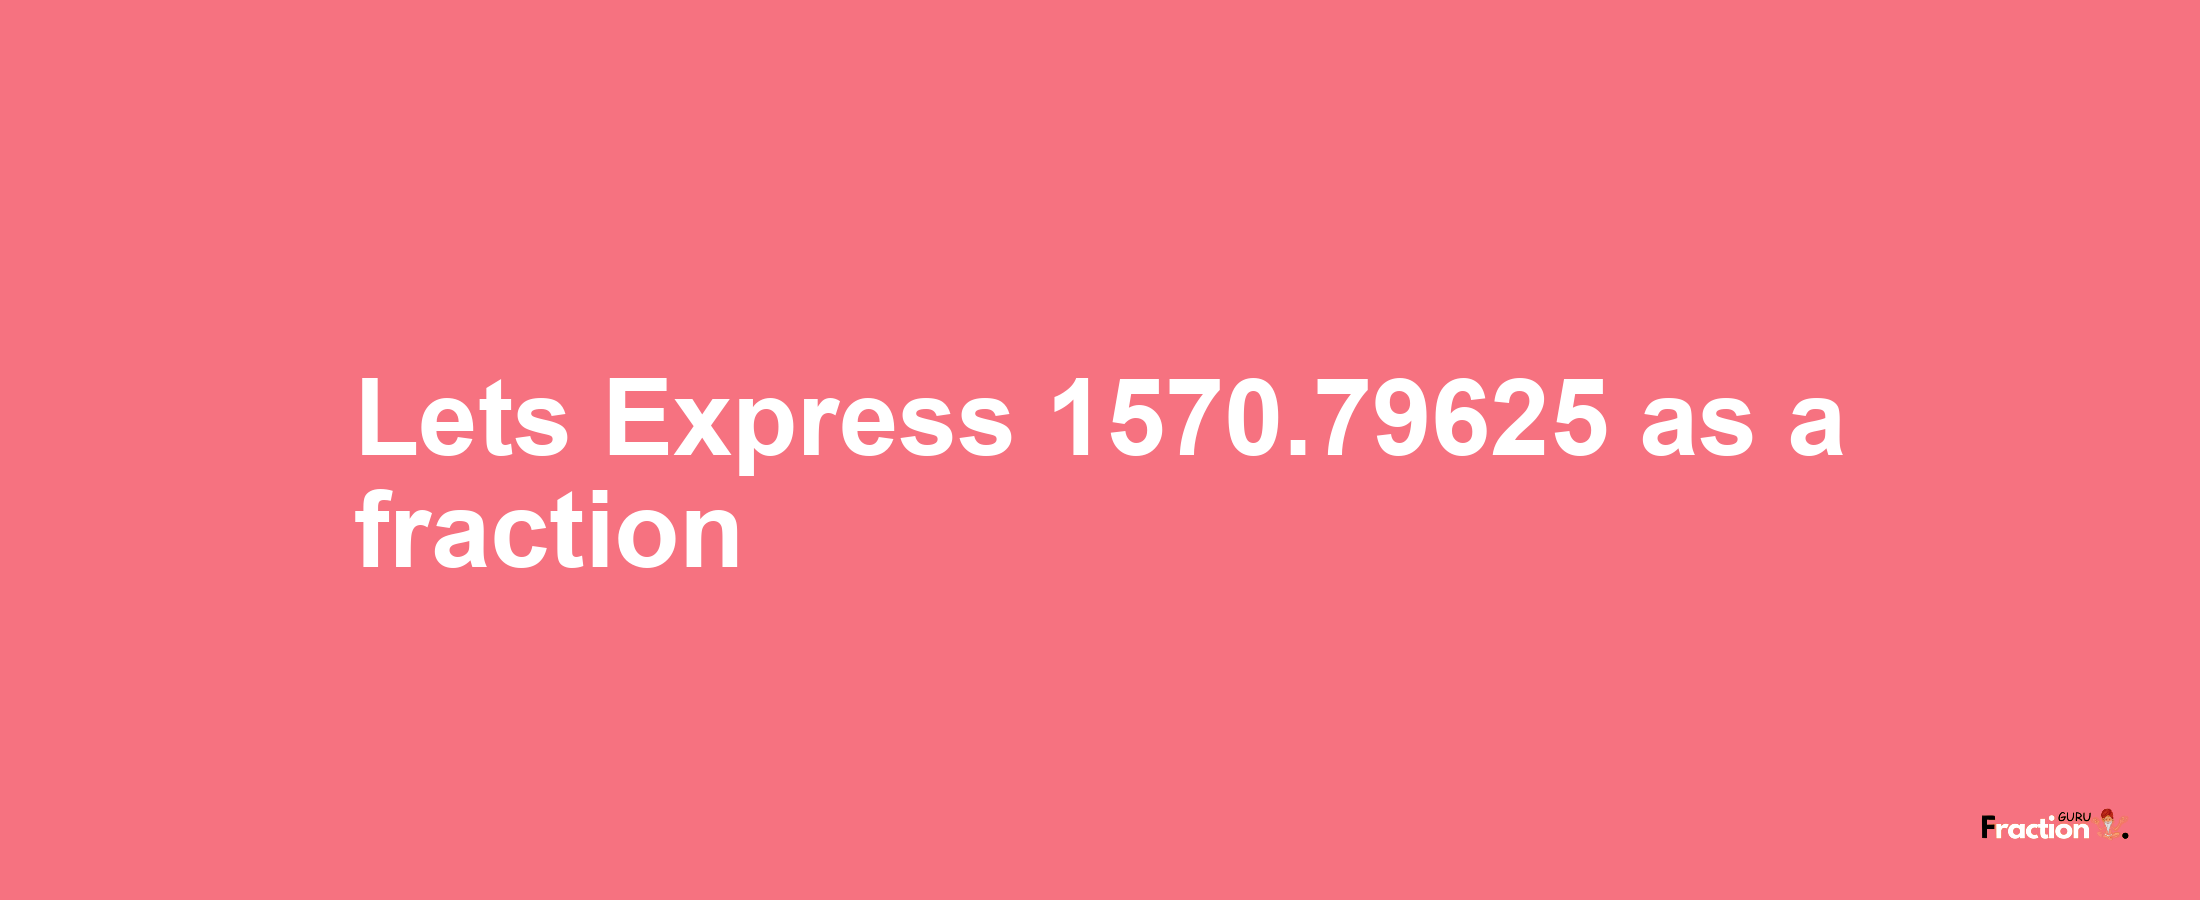 Lets Express 1570.79625 as afraction